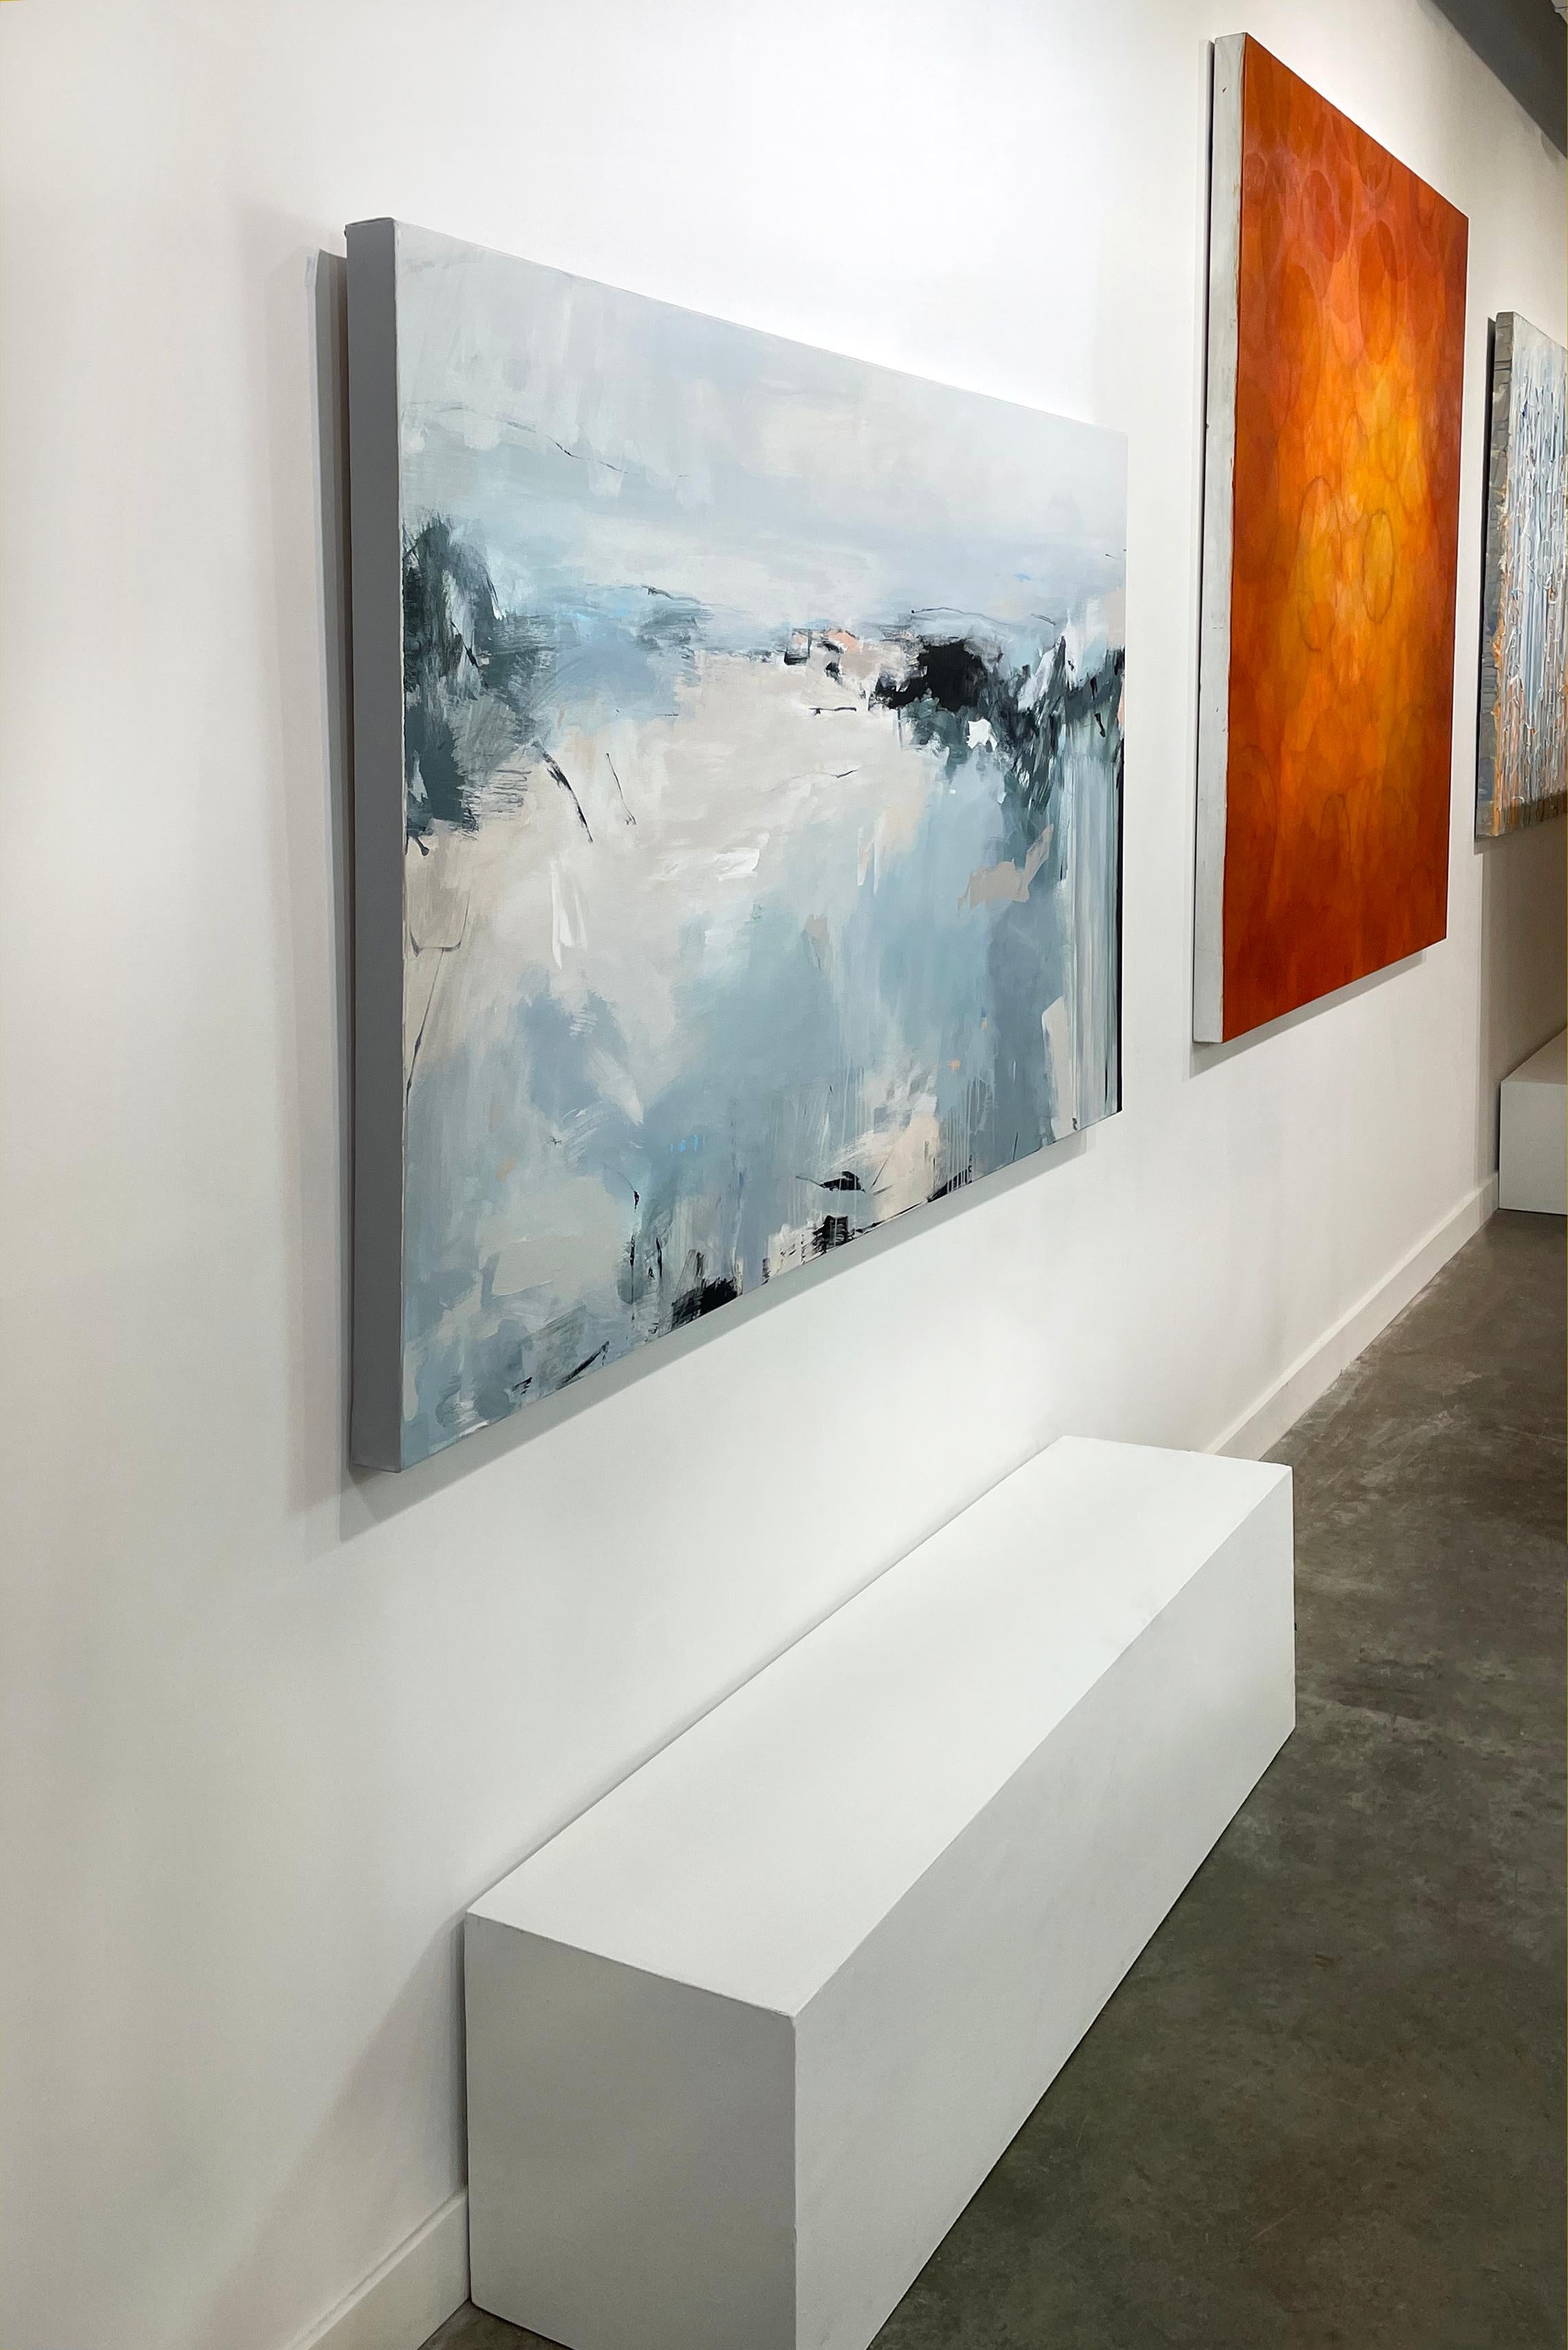 This contemporary abstract painting by Kelly Rossetti is made with acrylic paint on canvas. It features a cool palette, with light blue, grey, white, charcoal black accents and contrasting pale pink added in broad, energetic strokes throughout. The